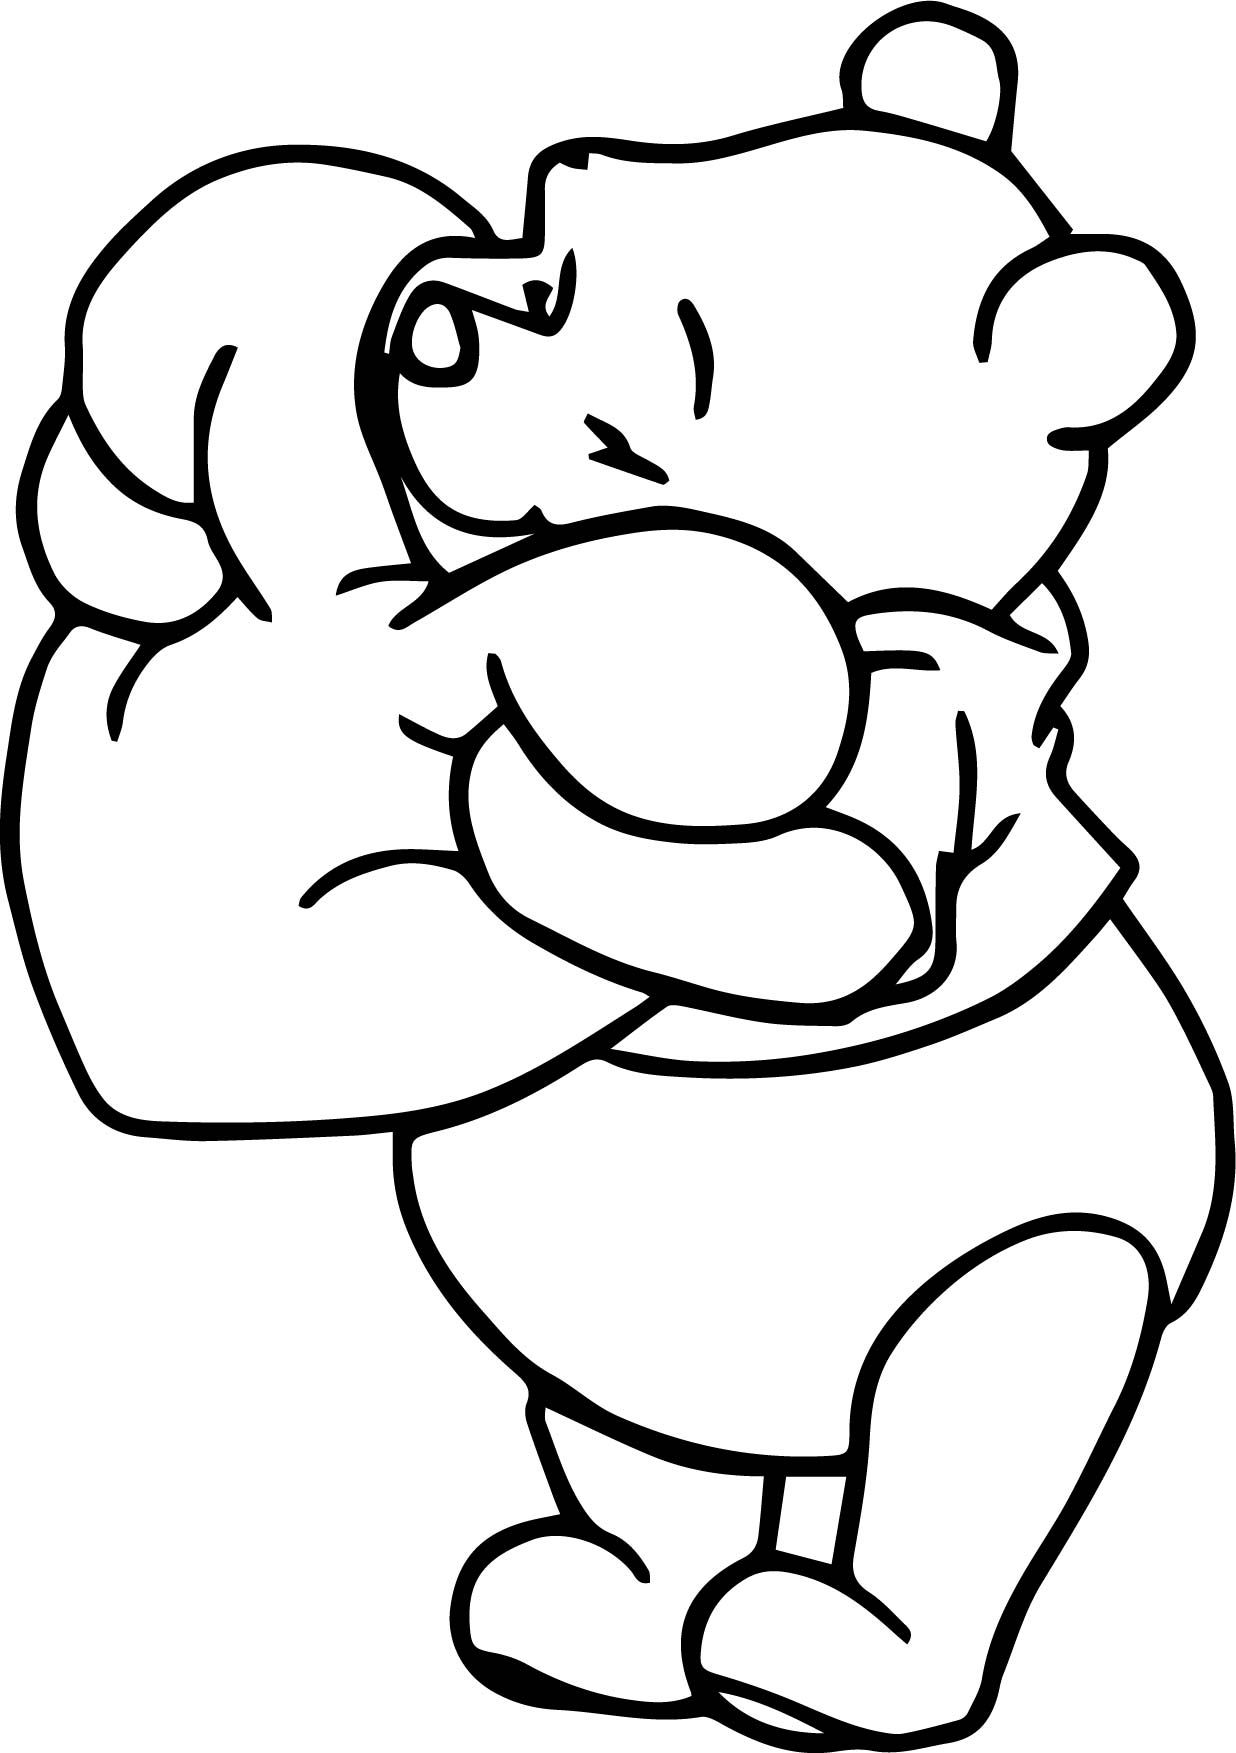 Winnie the pooh heart pillow coloring page